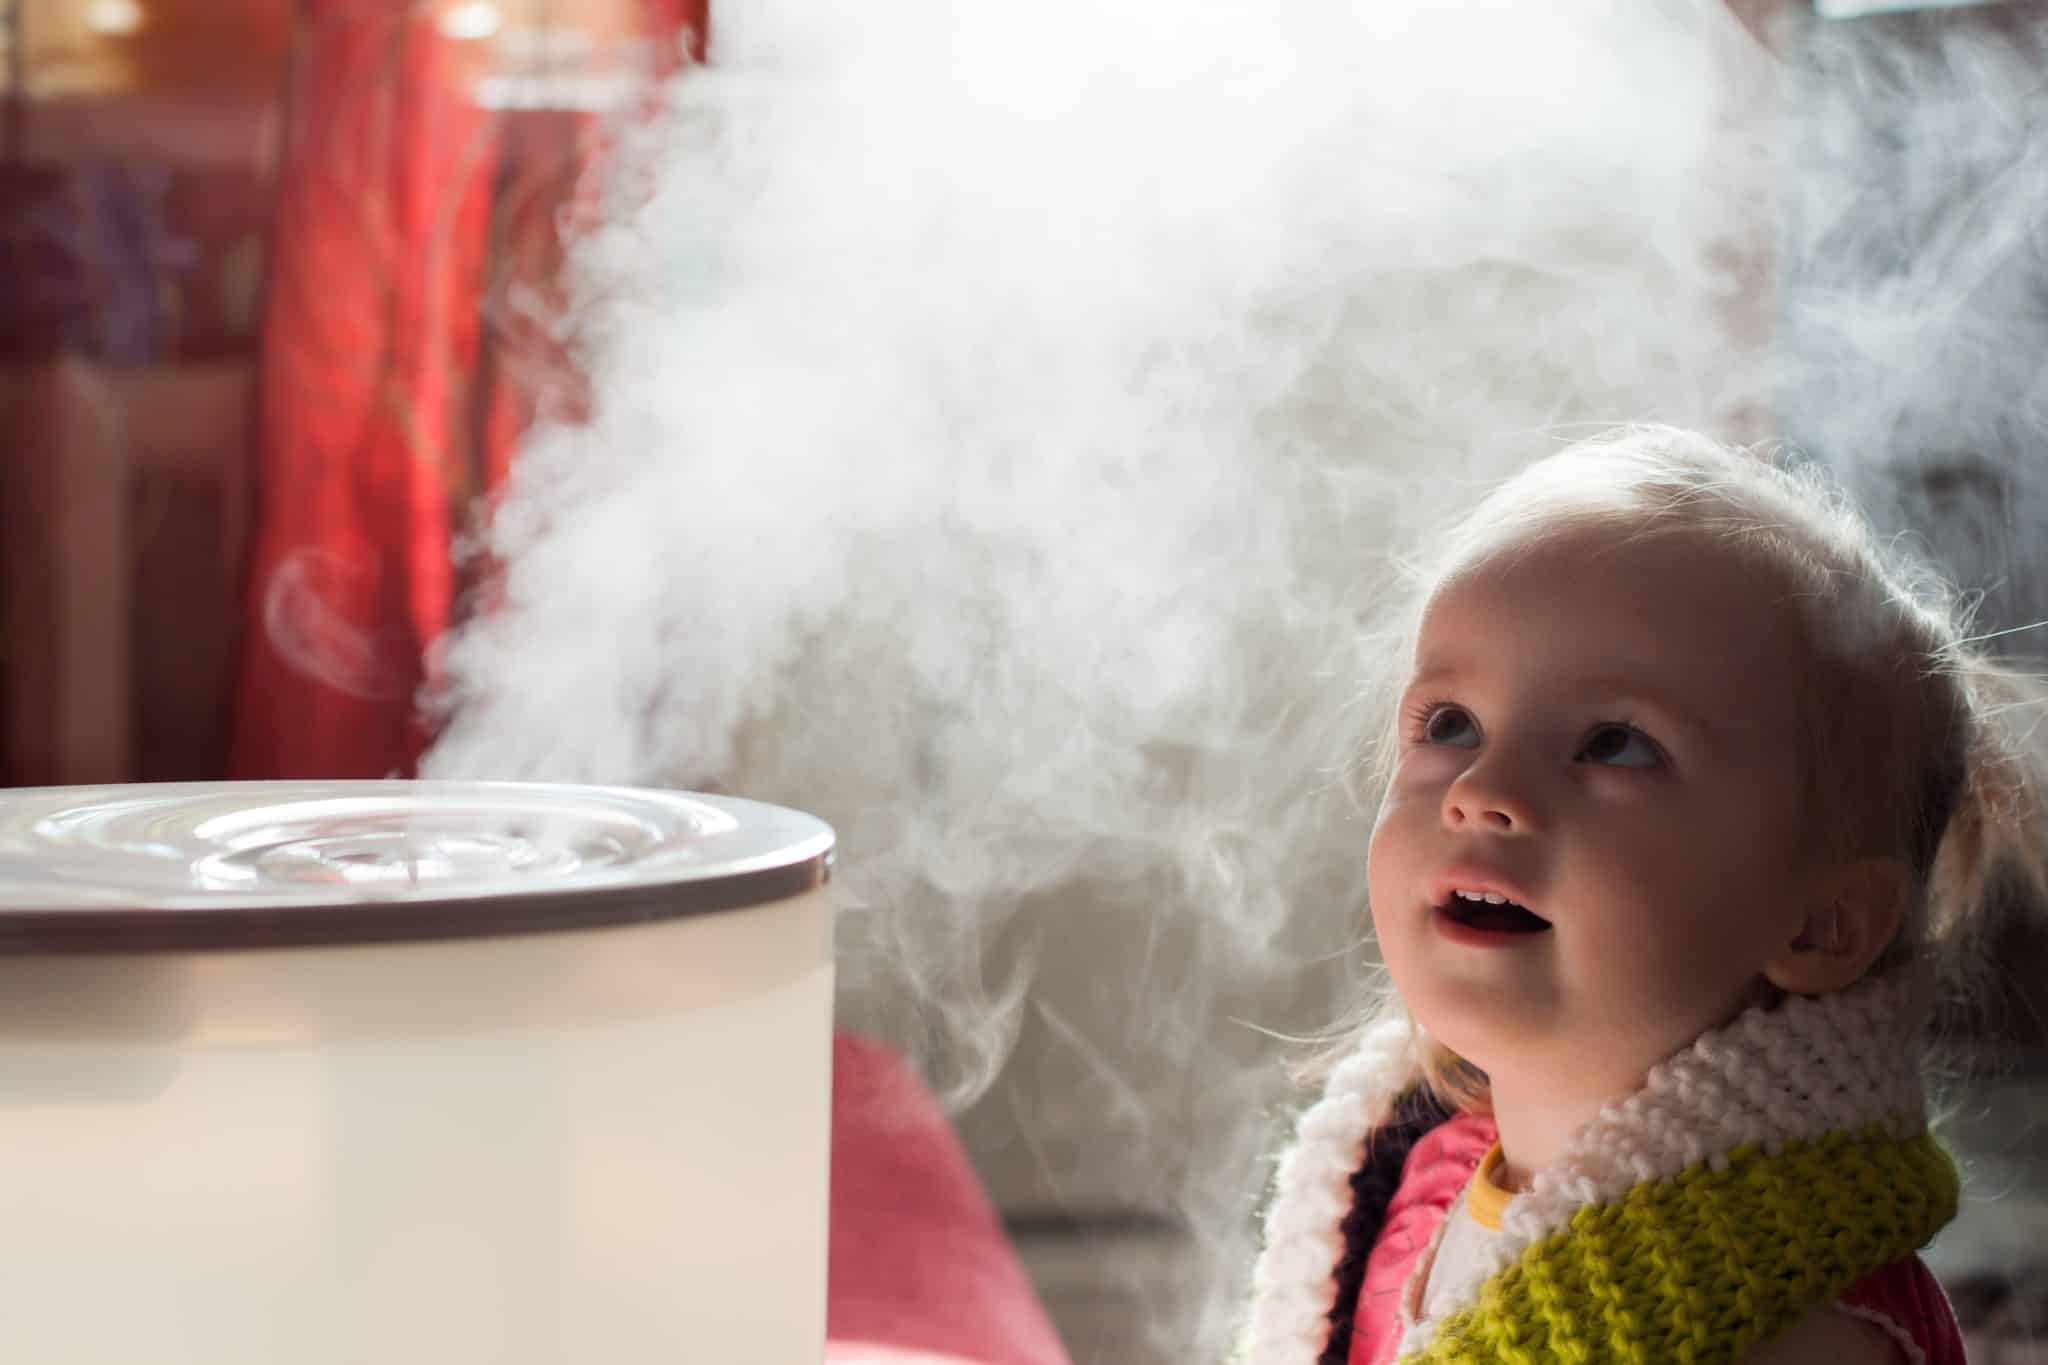 Little girl breathing in the mist from a humidifier